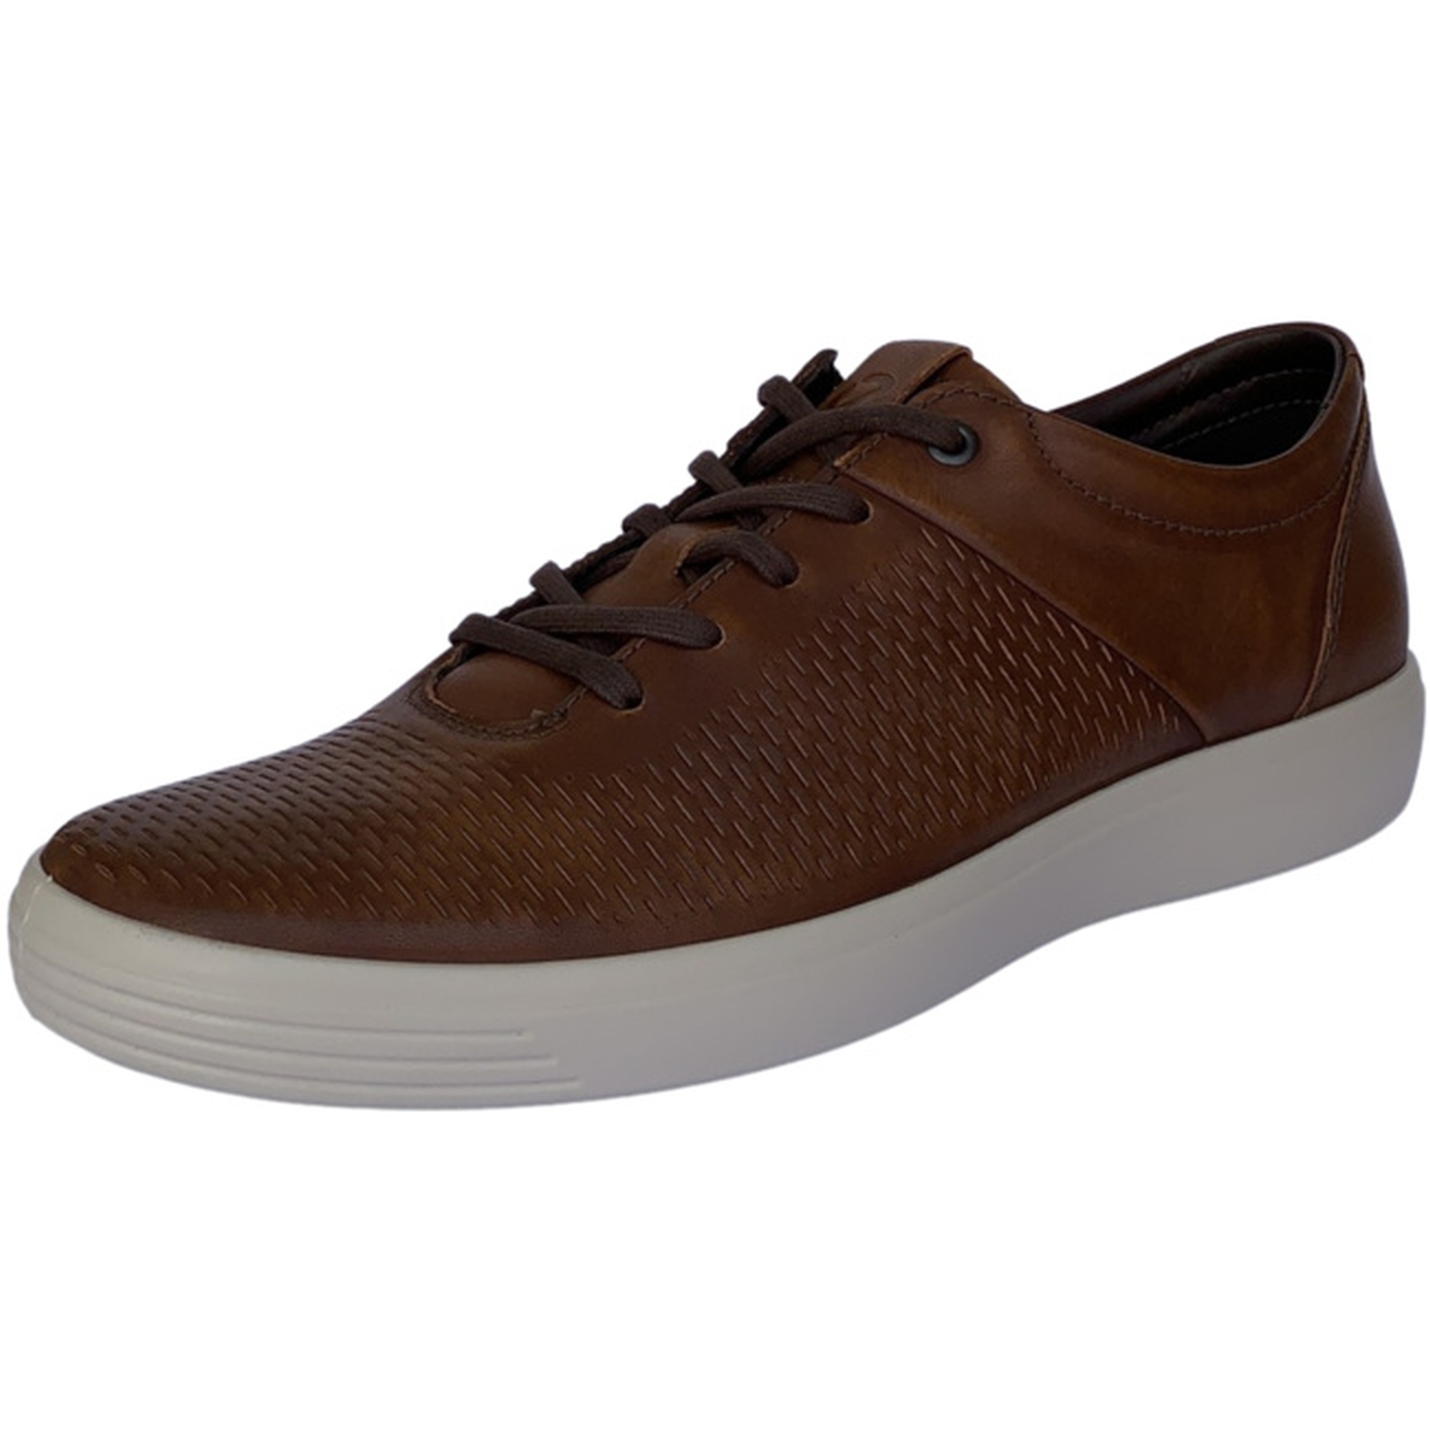 Ecco Ecco Soft 7 - Light brown smooth leather